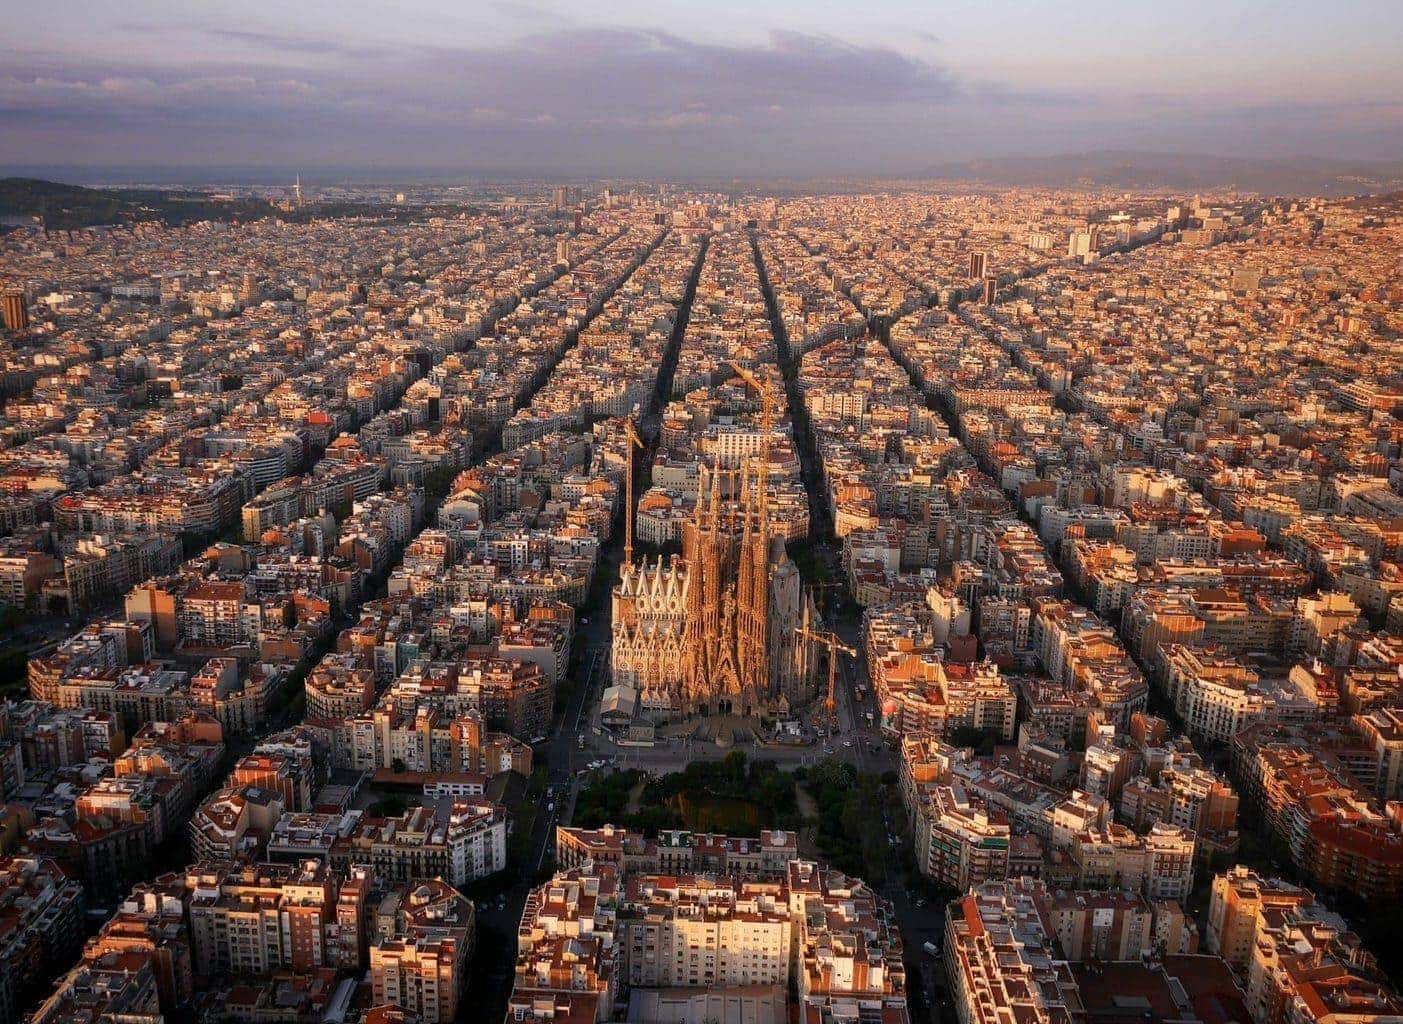 The City of Barcelona, Spain. One of the densest populated places on Earth.